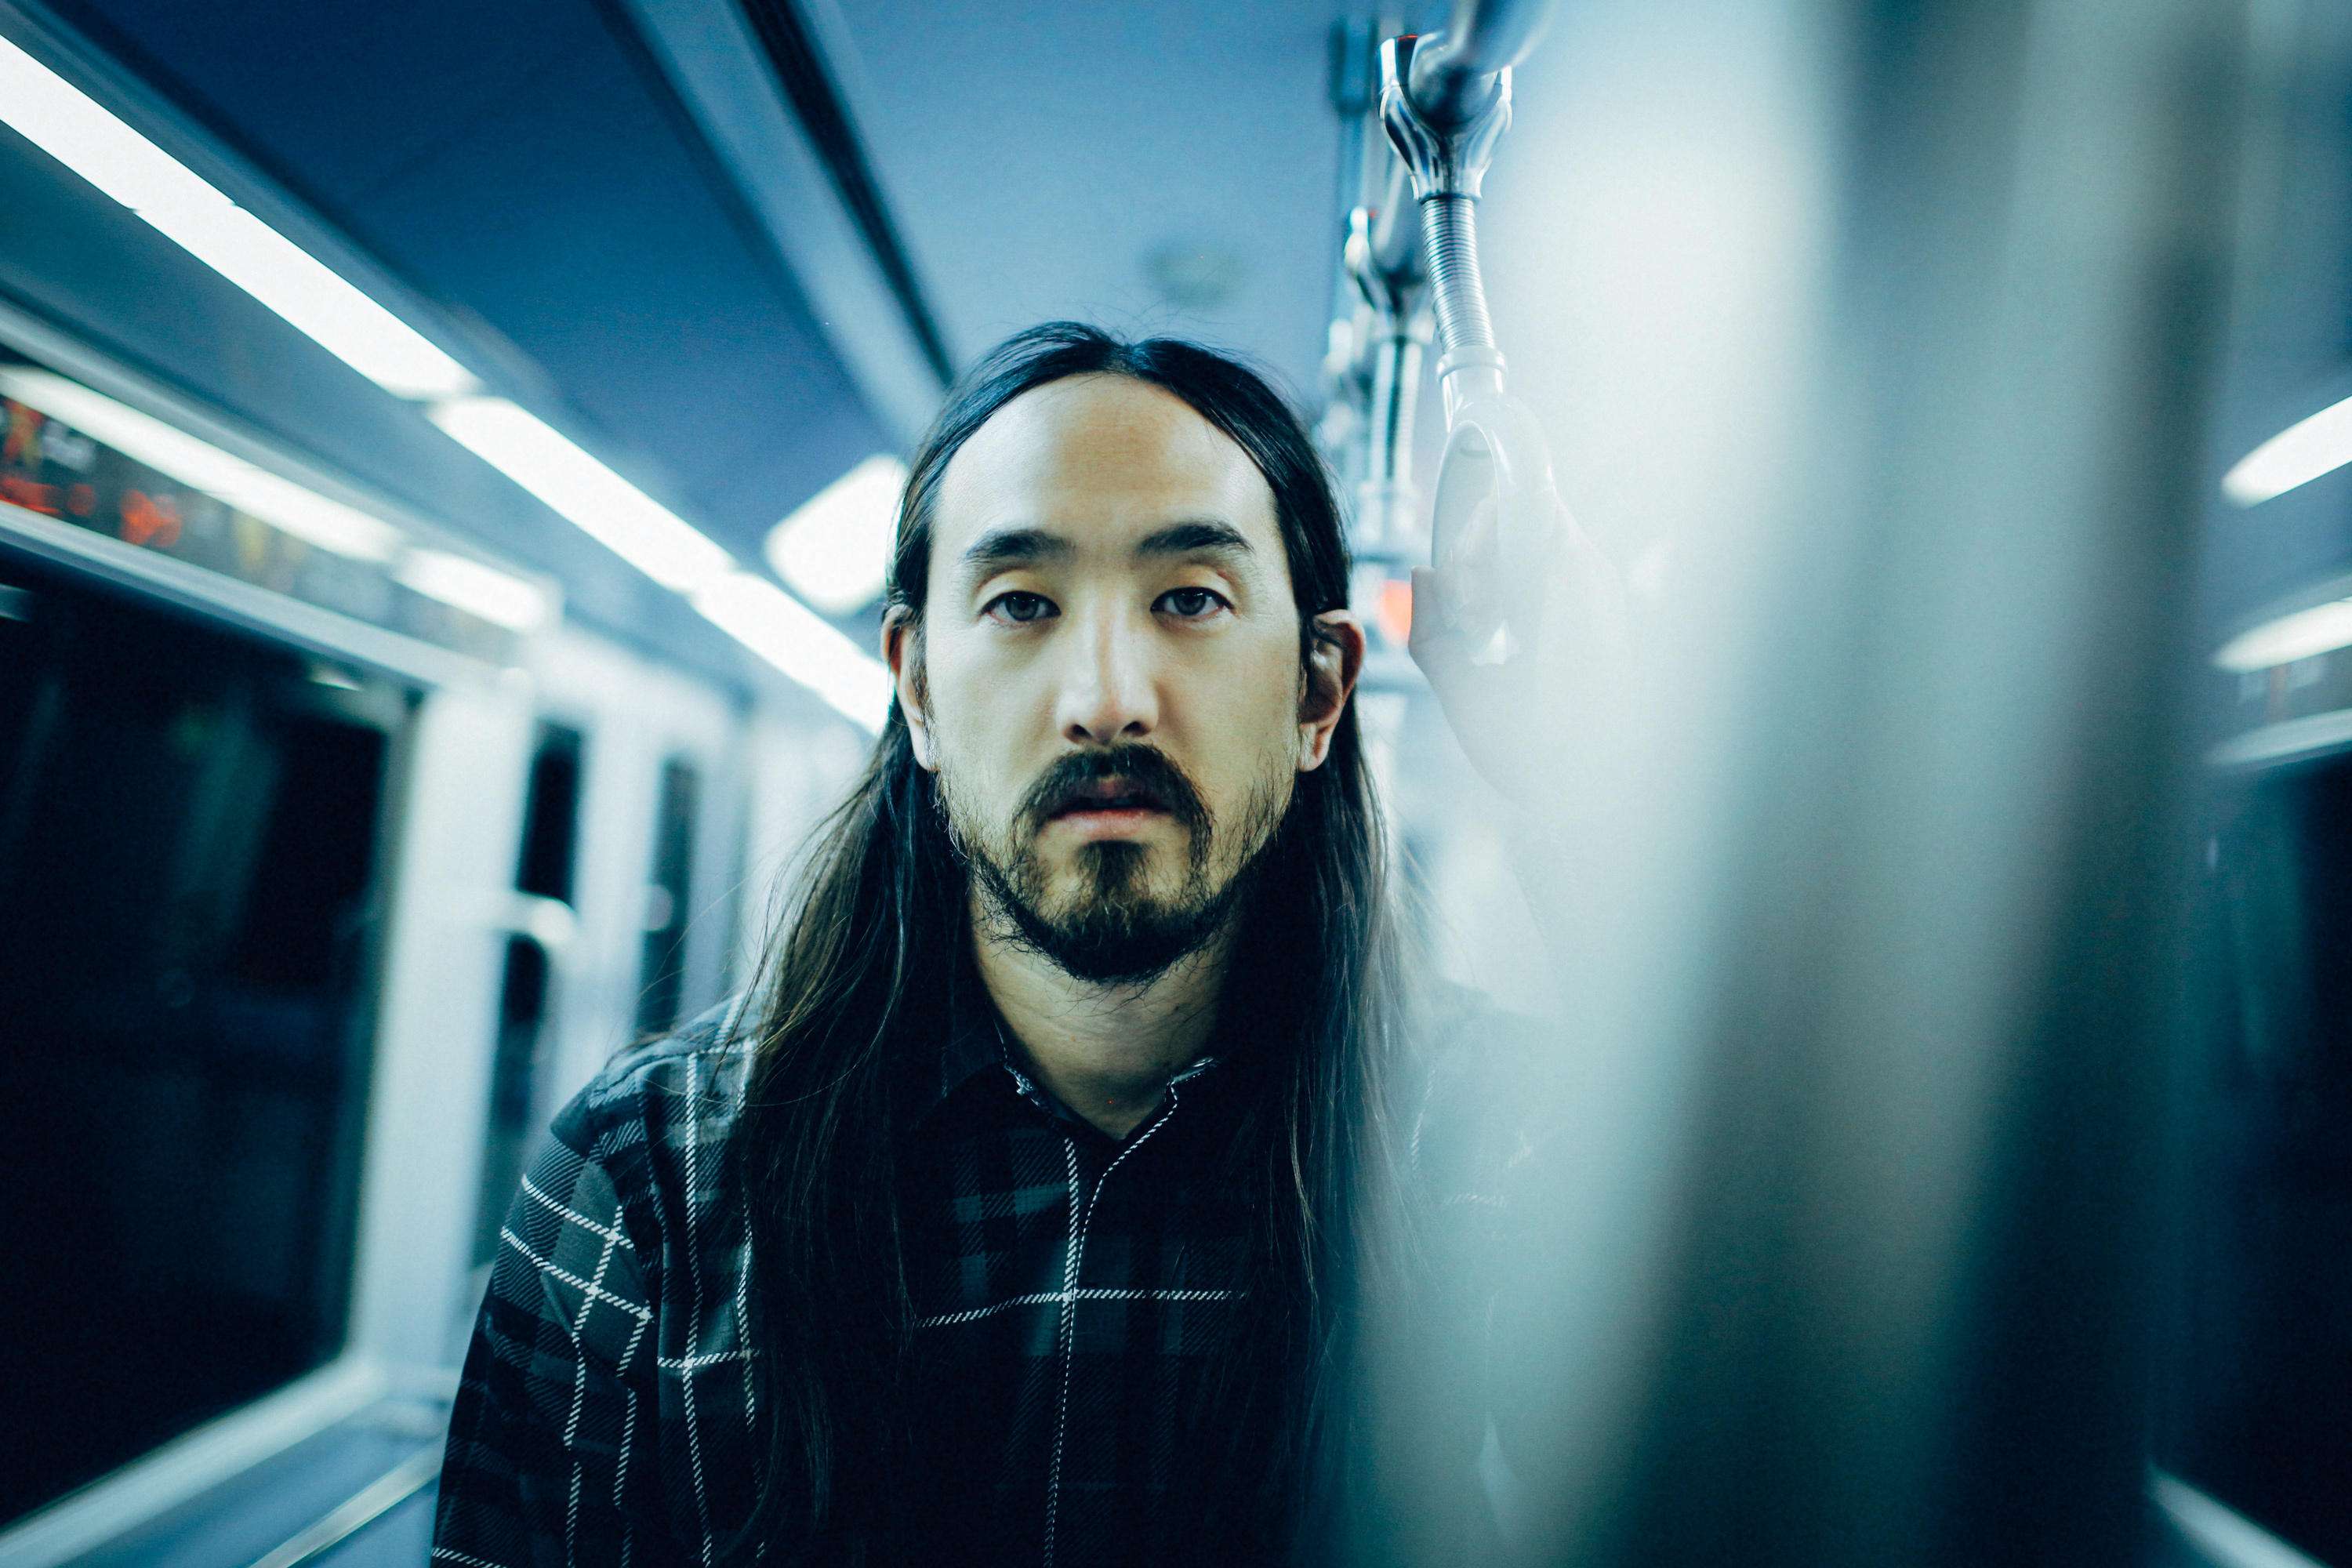 48 Facts About Steve Aoki - Facts.net